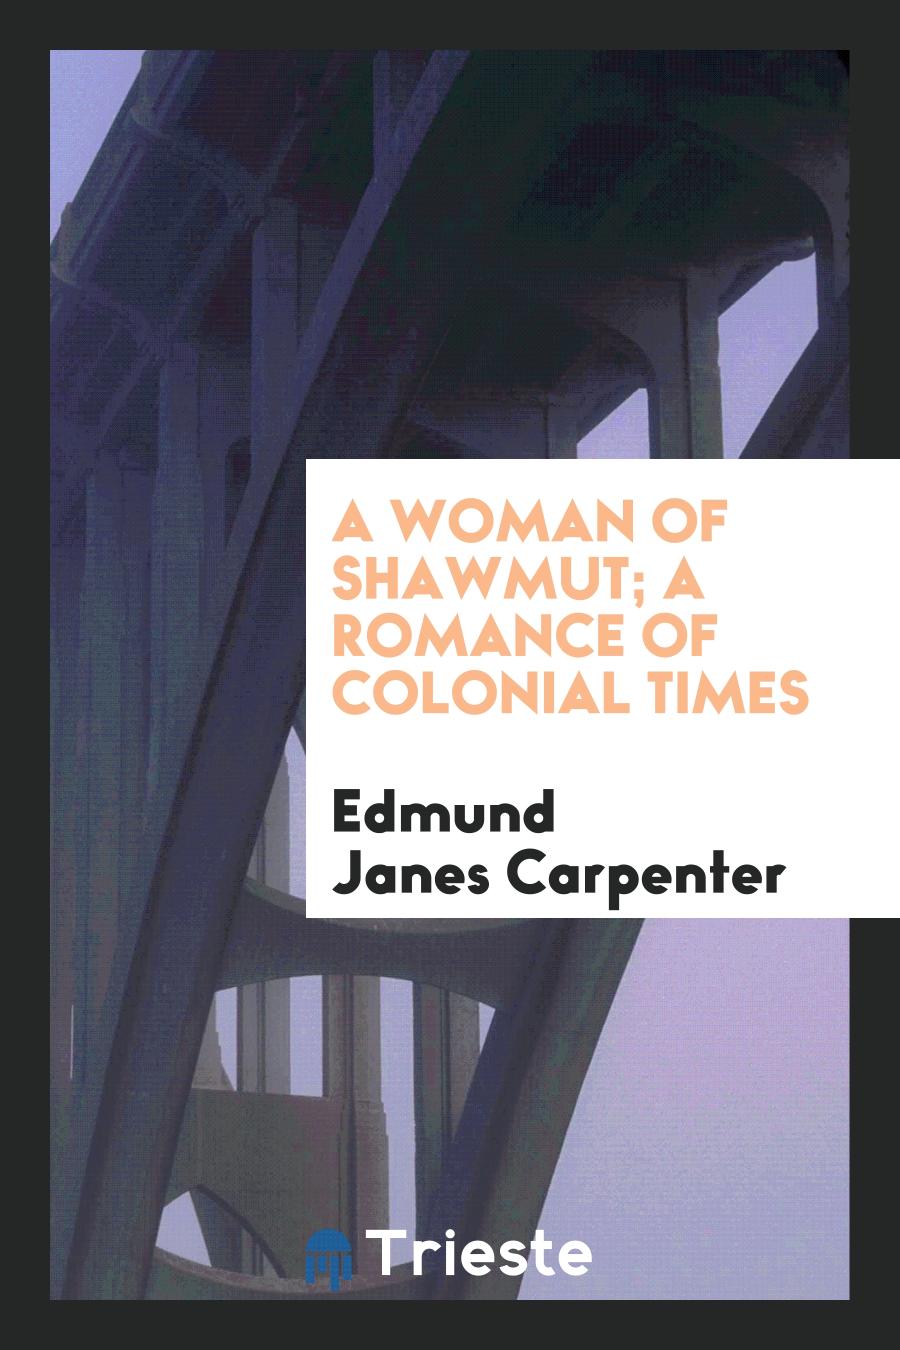 A woman of Shawmut; a romance of colonial times